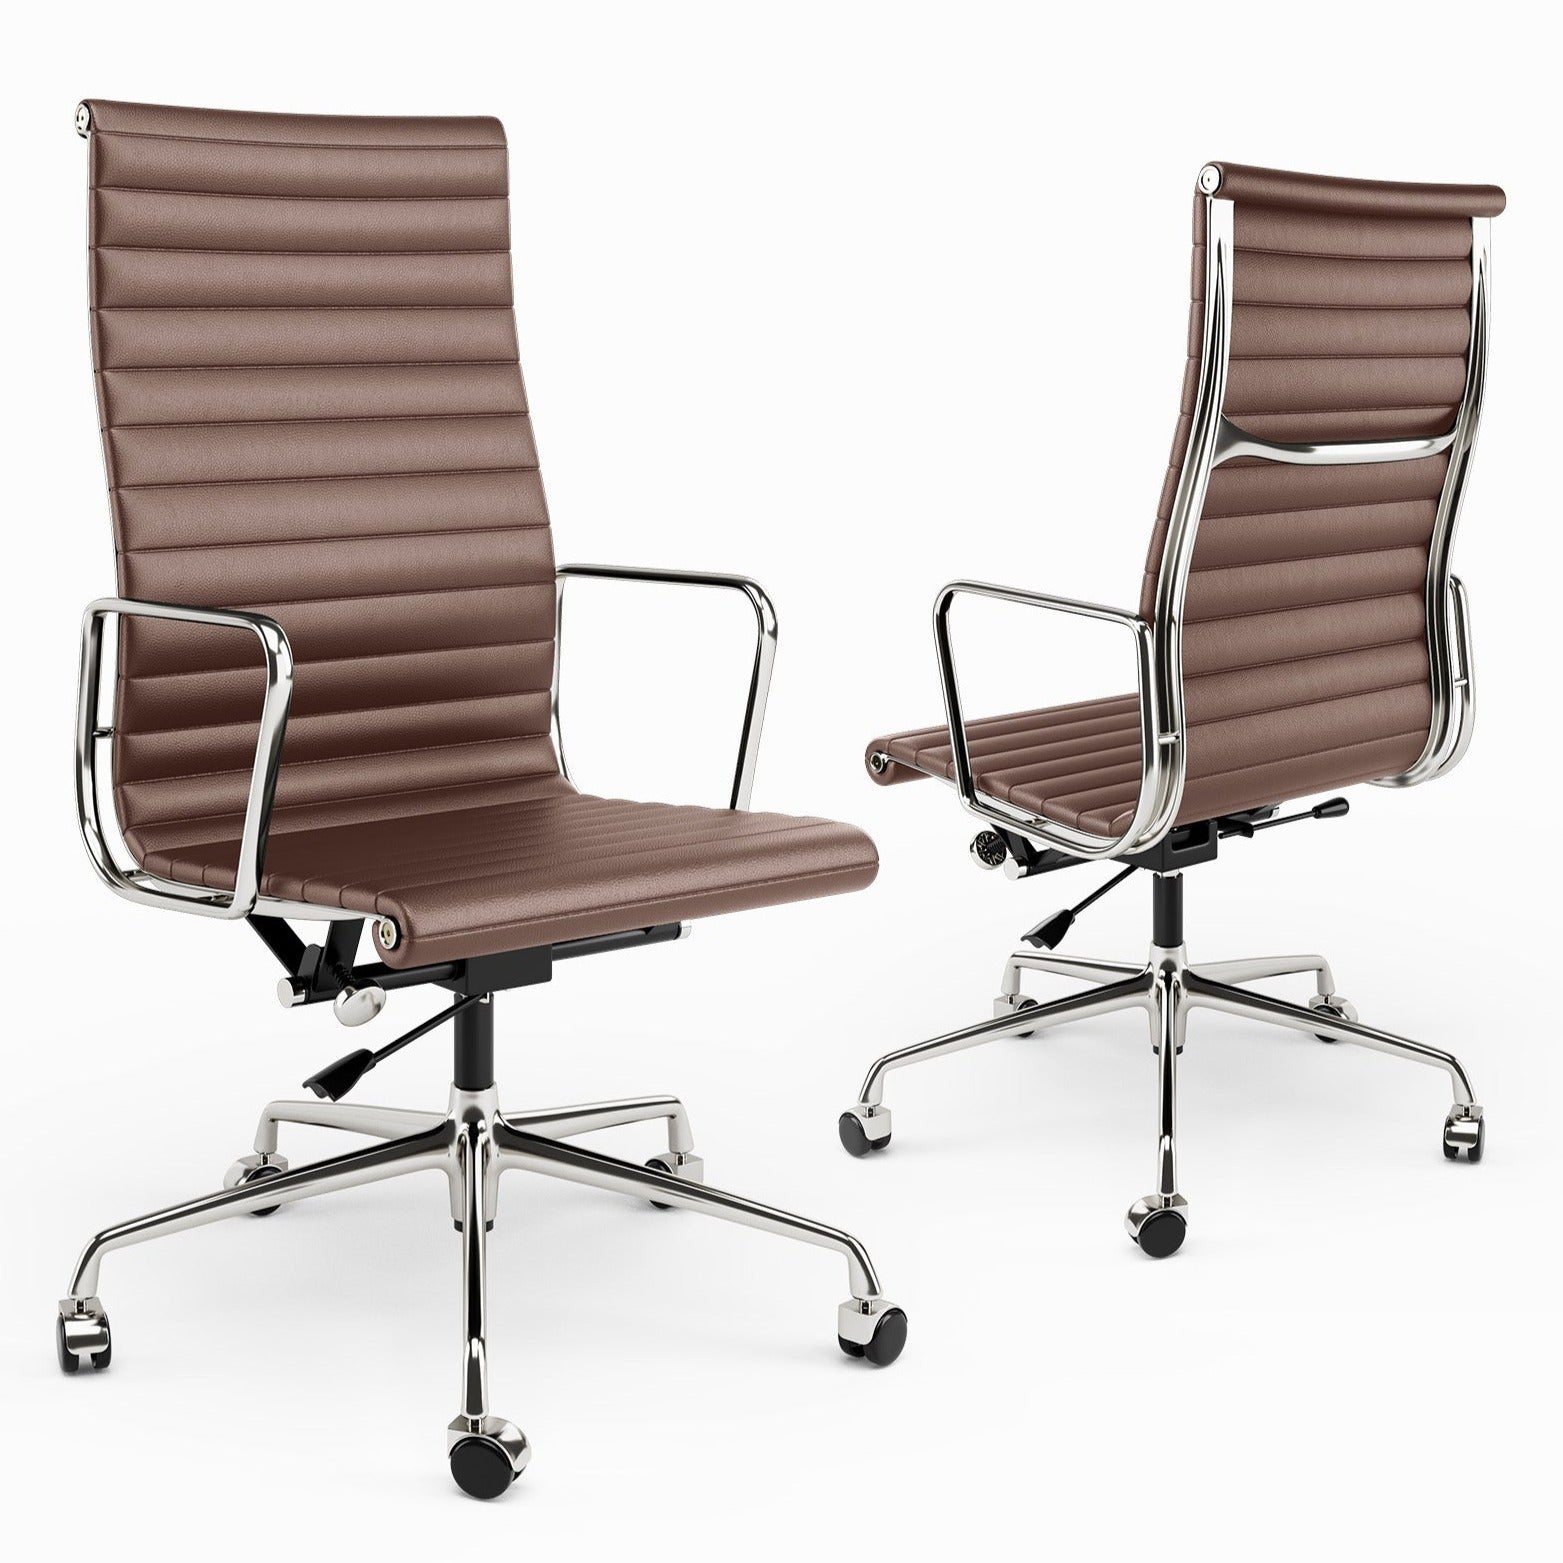 Luxuriance Designs - Eames Aluminum Group Chair - Brown Color and High Backrest - Review